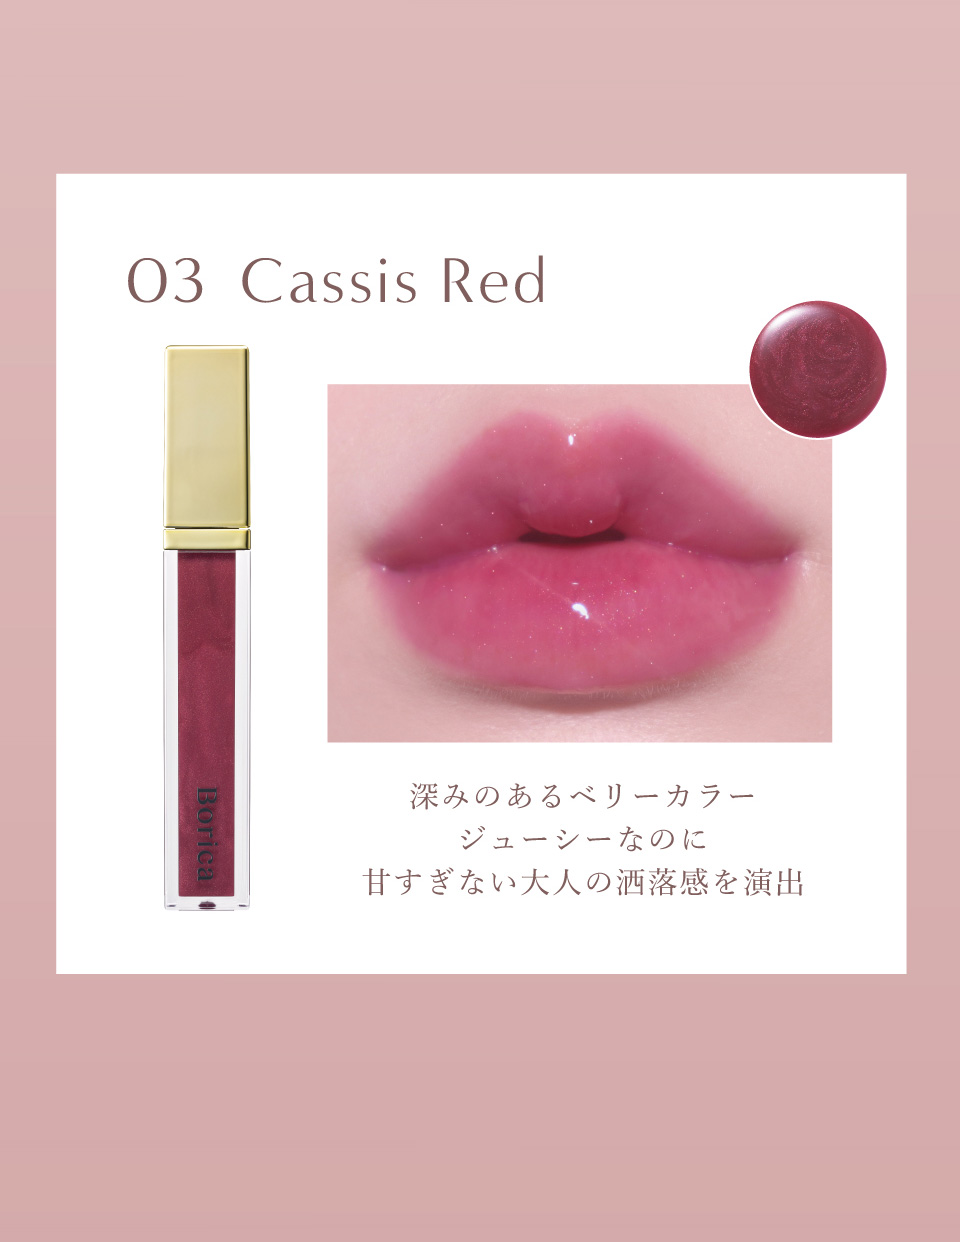 03 Cassis Red